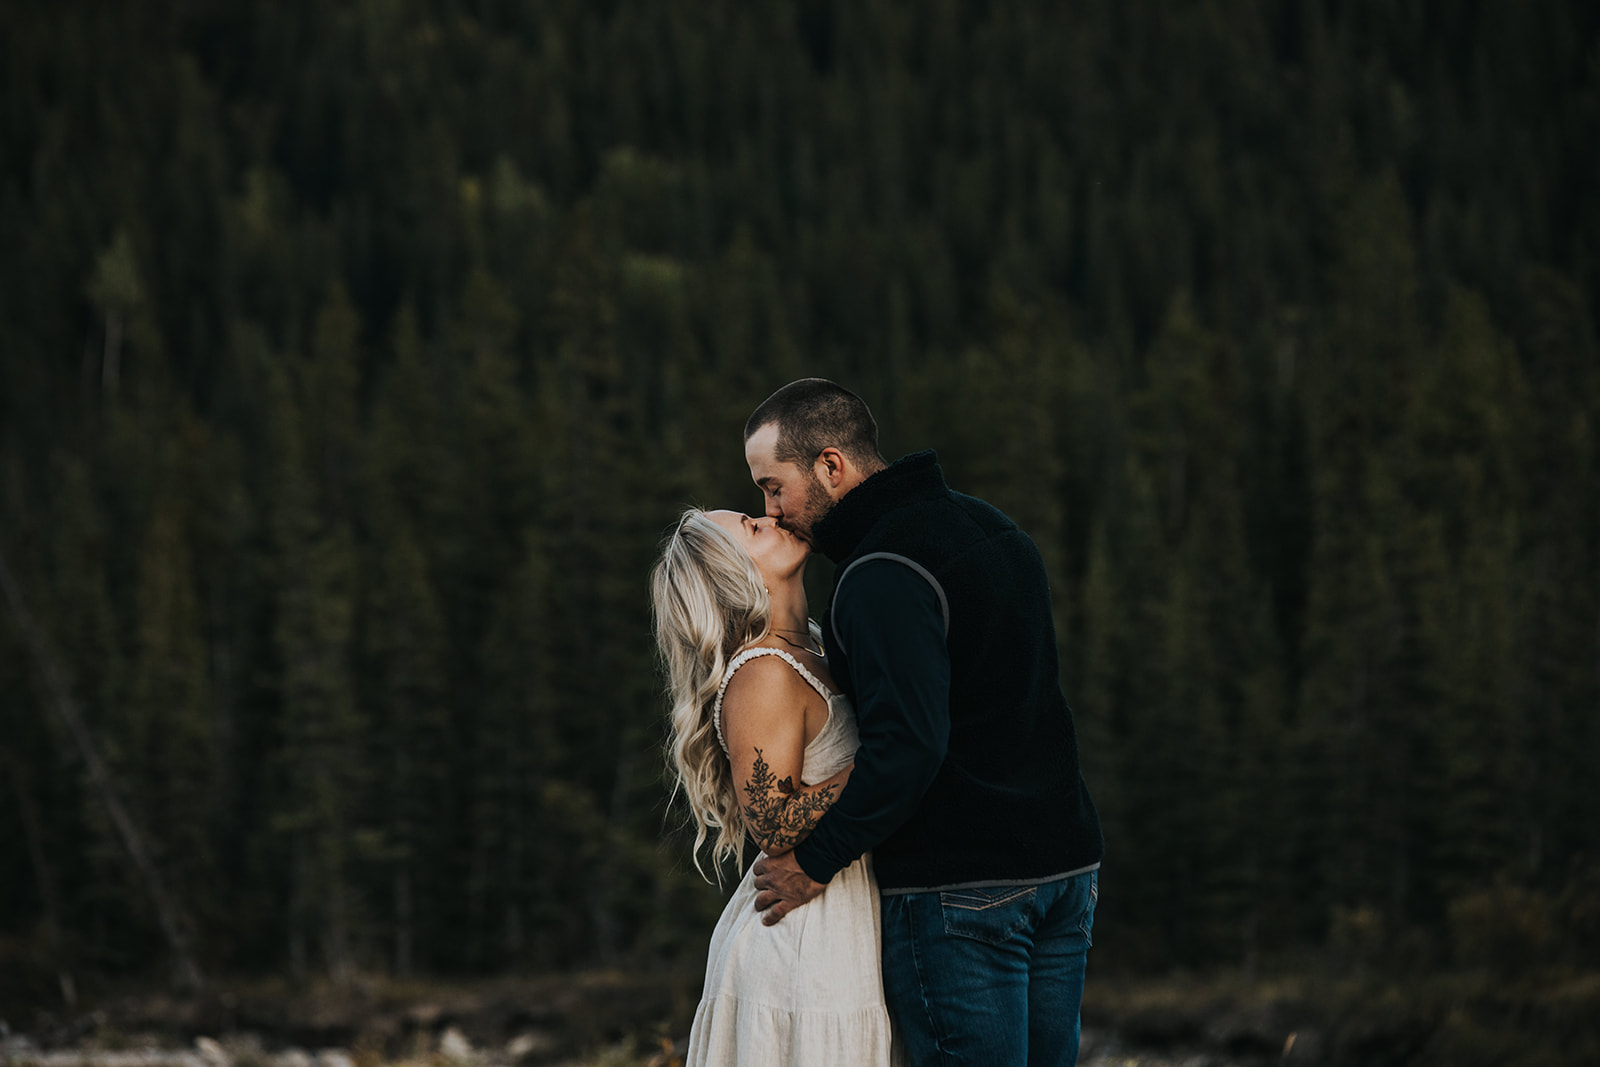 Calgary Engagement Photographer: Capturing Magical Moments at Forget Me Not Pond
